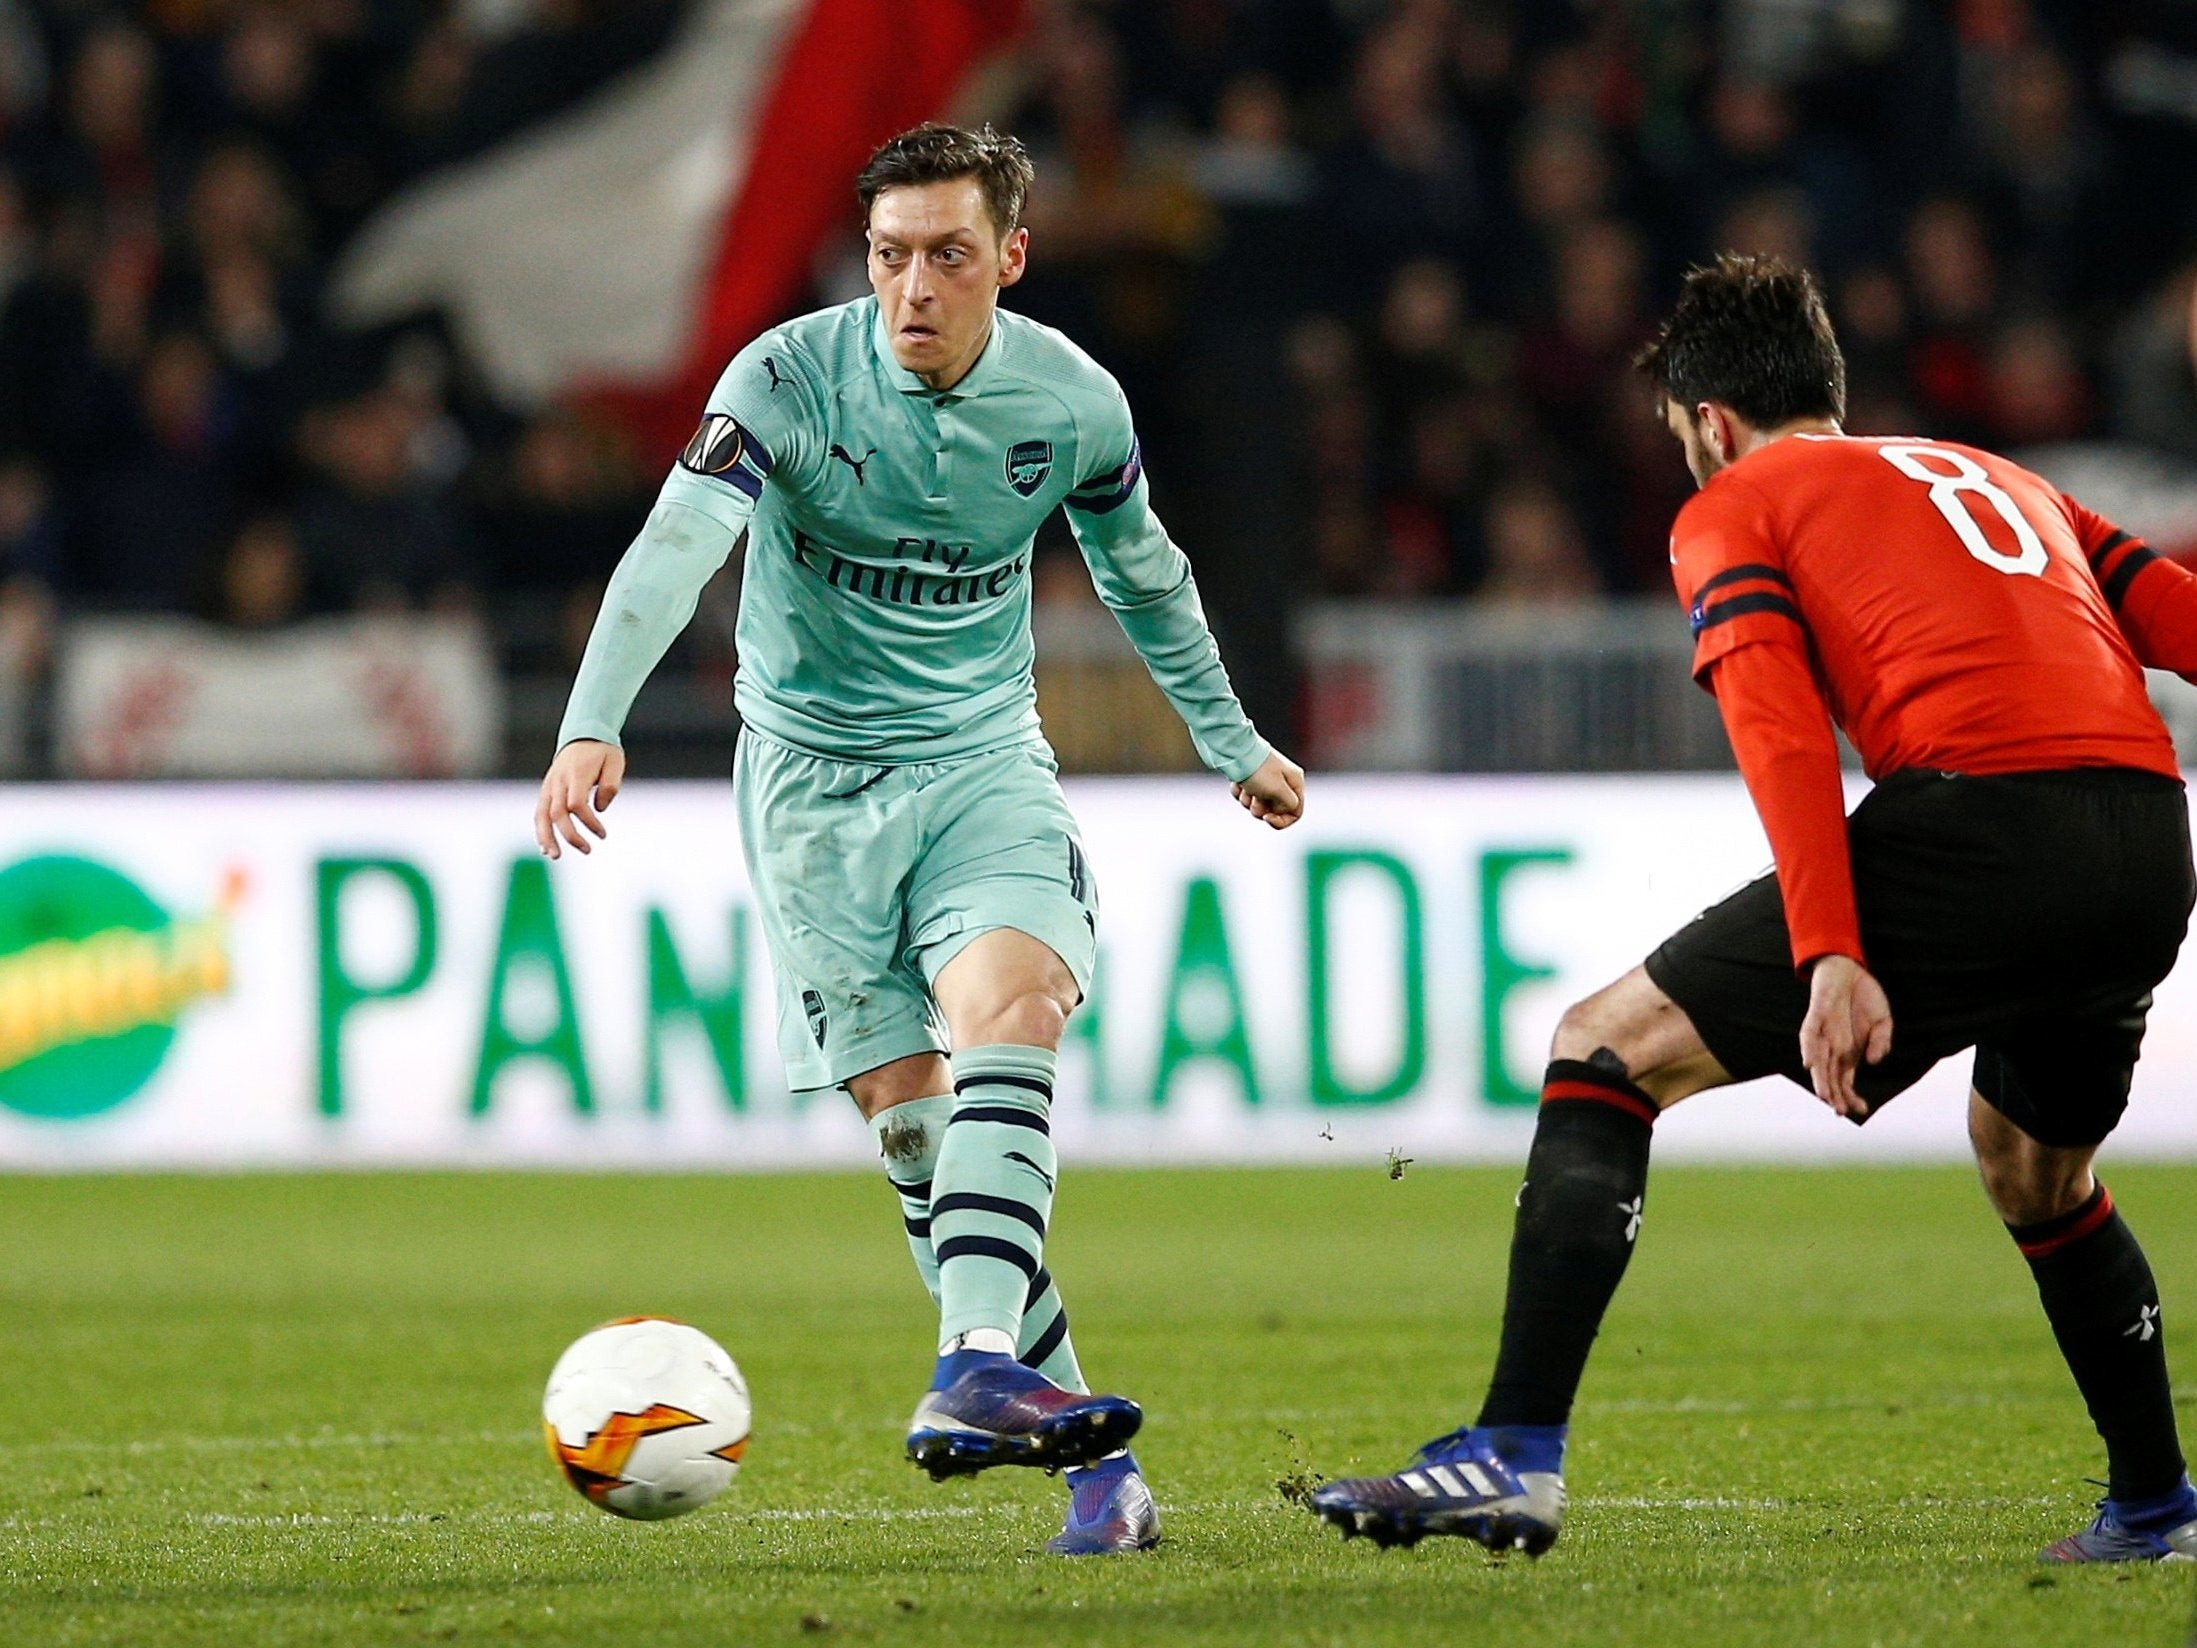 Mesut Ozil had little impact on the match for the Gunners